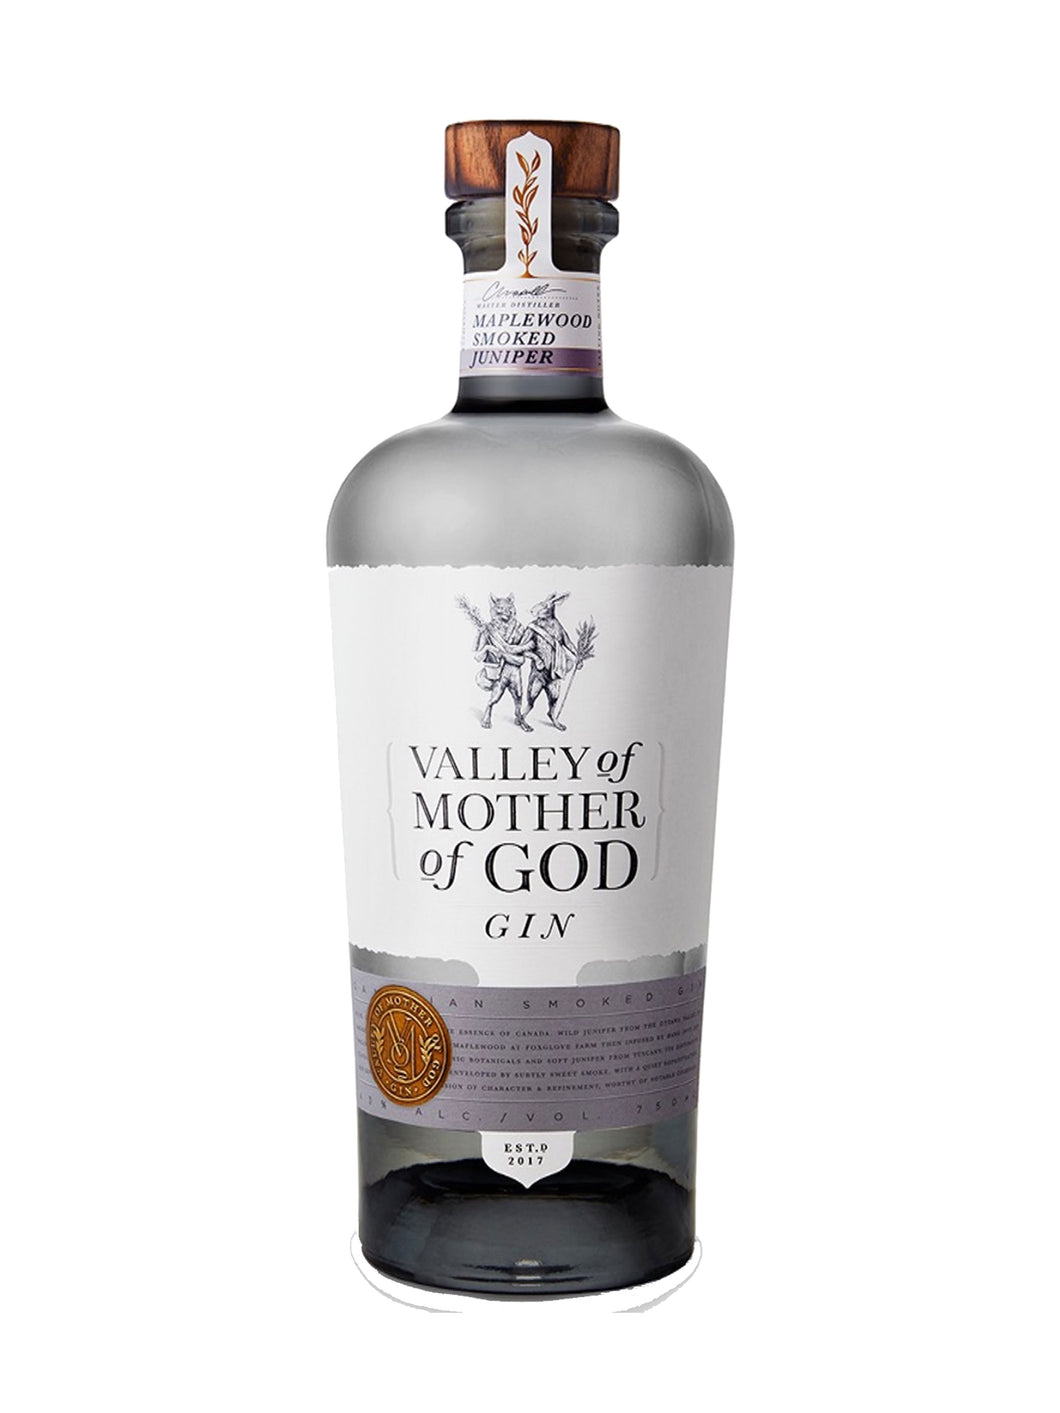 Valley of Mother of God Smoked Gin 750 ml bottle